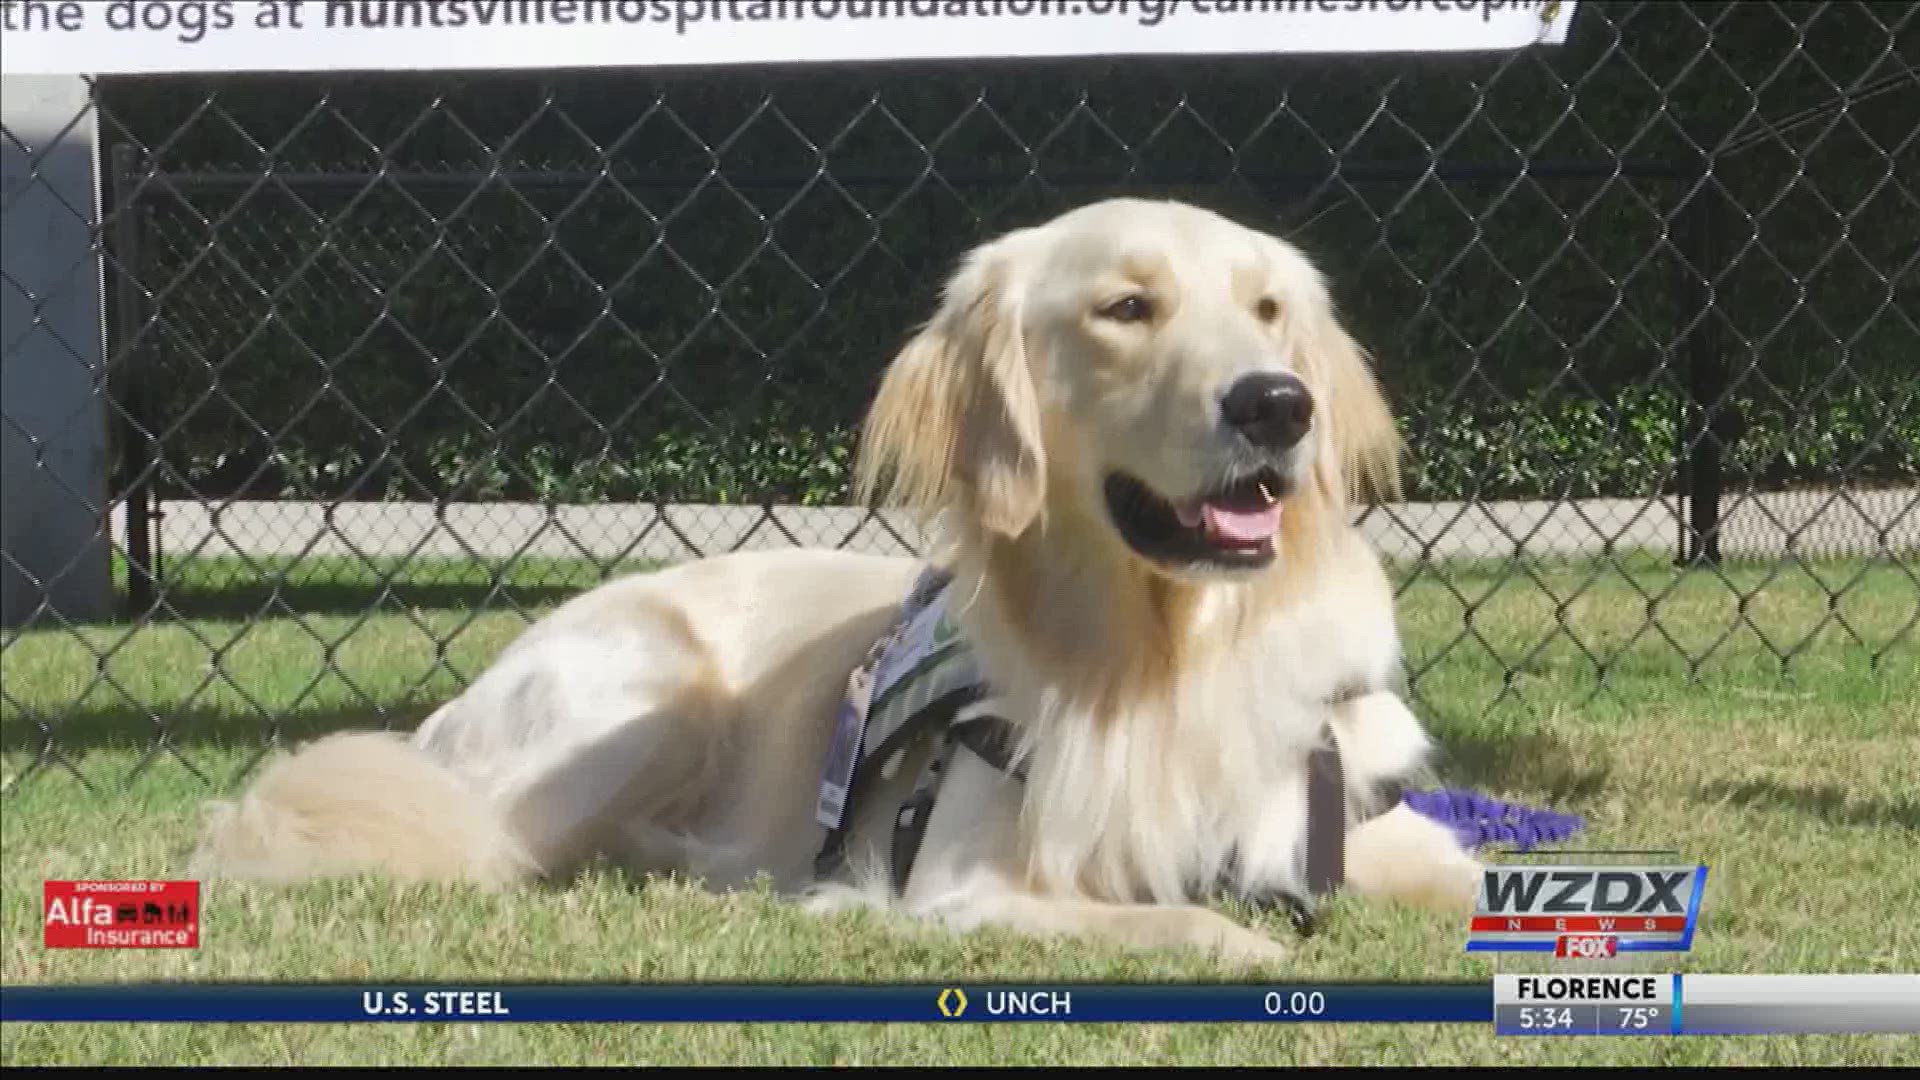 Orbit is a Golden Retriever and is the hospital's second facility dog. He started working at the hospital in September.